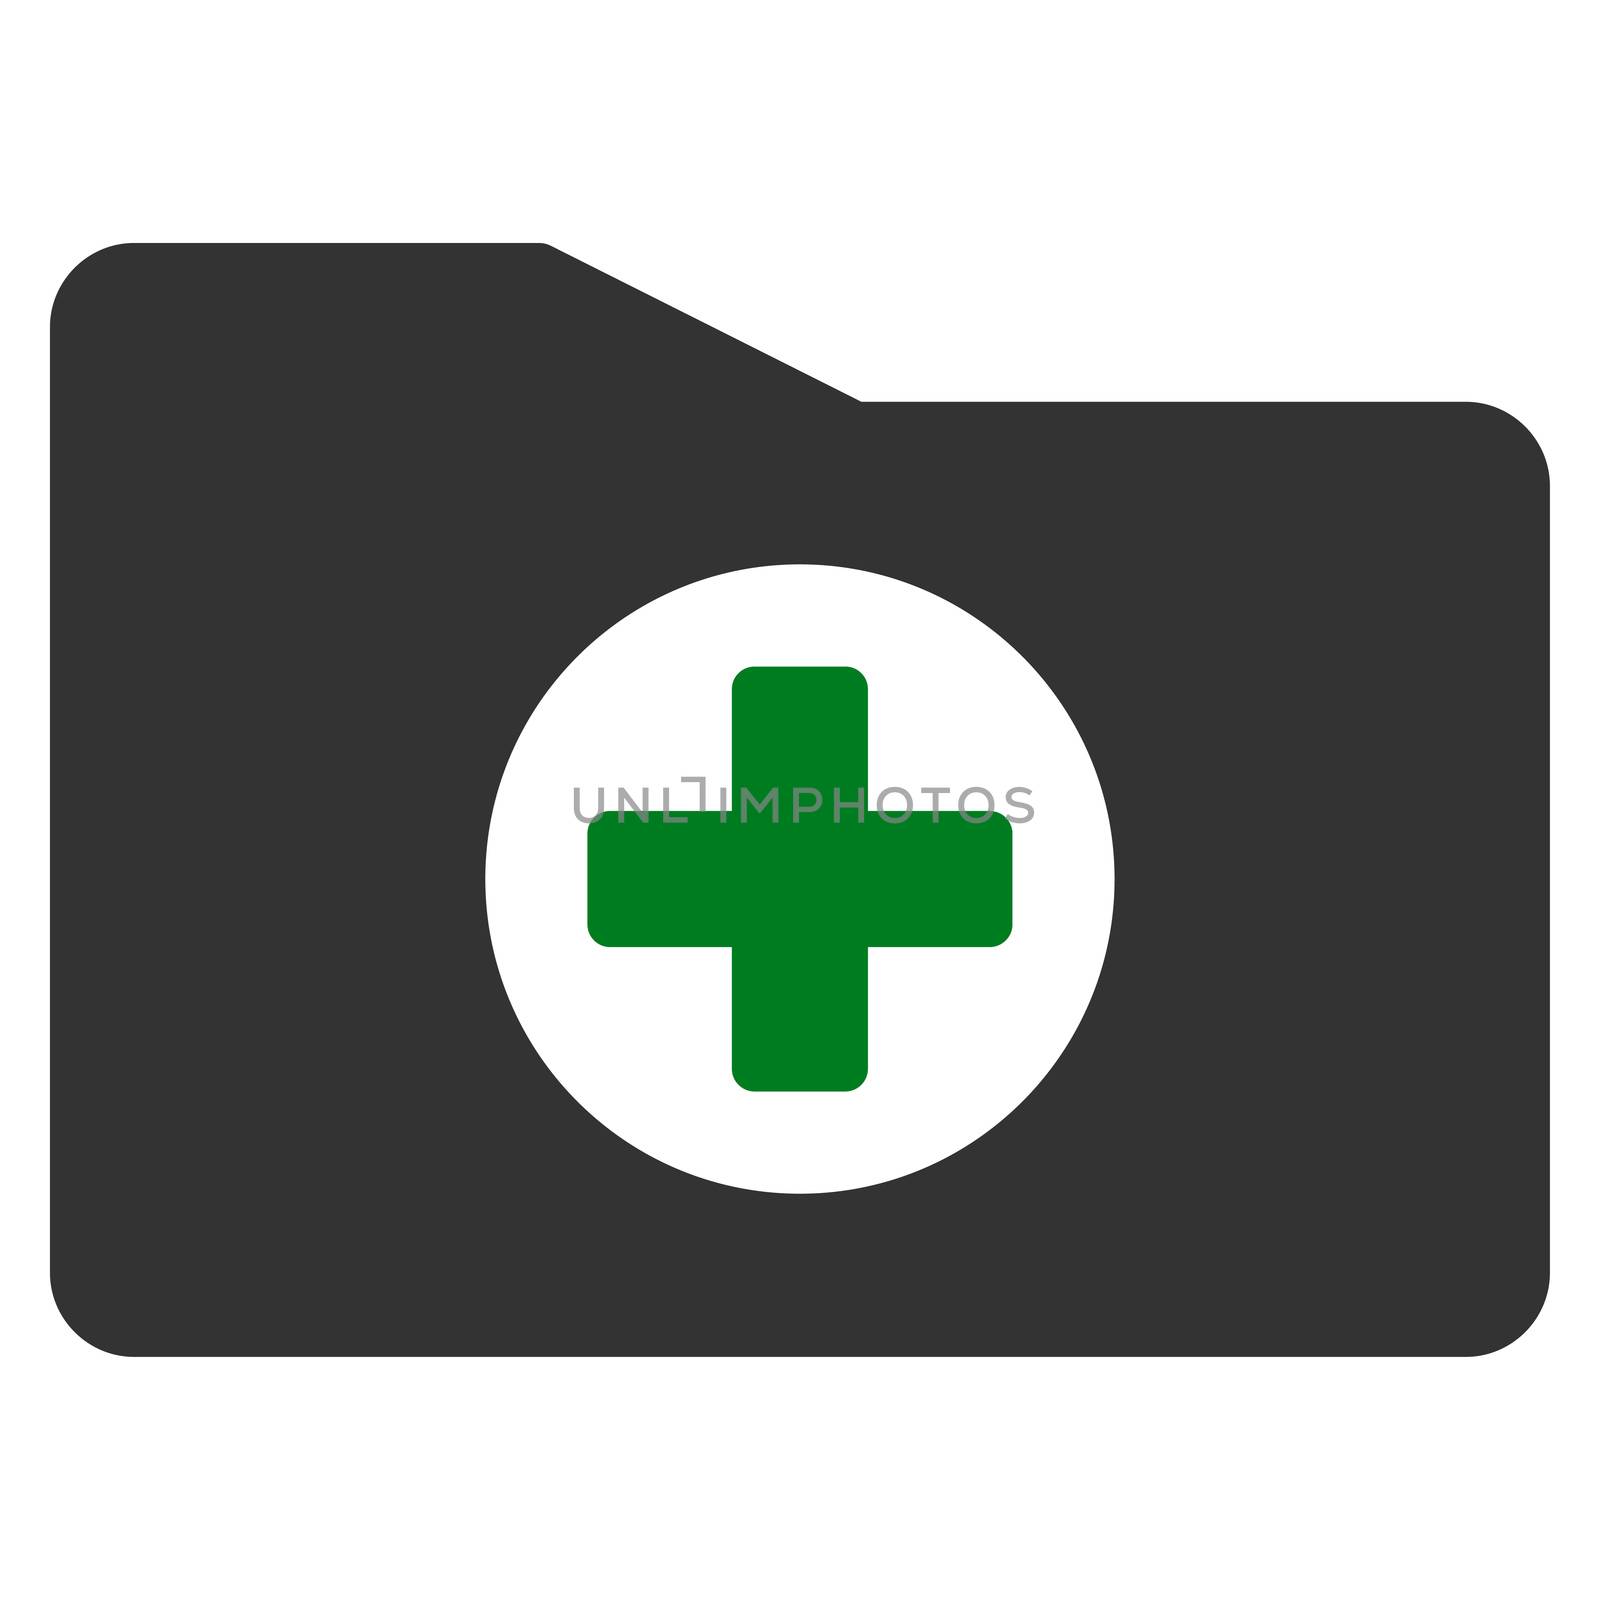 Medical Folder raster icon. Style is bicolor flat symbol, green and gray colors, rounded angles, white background.